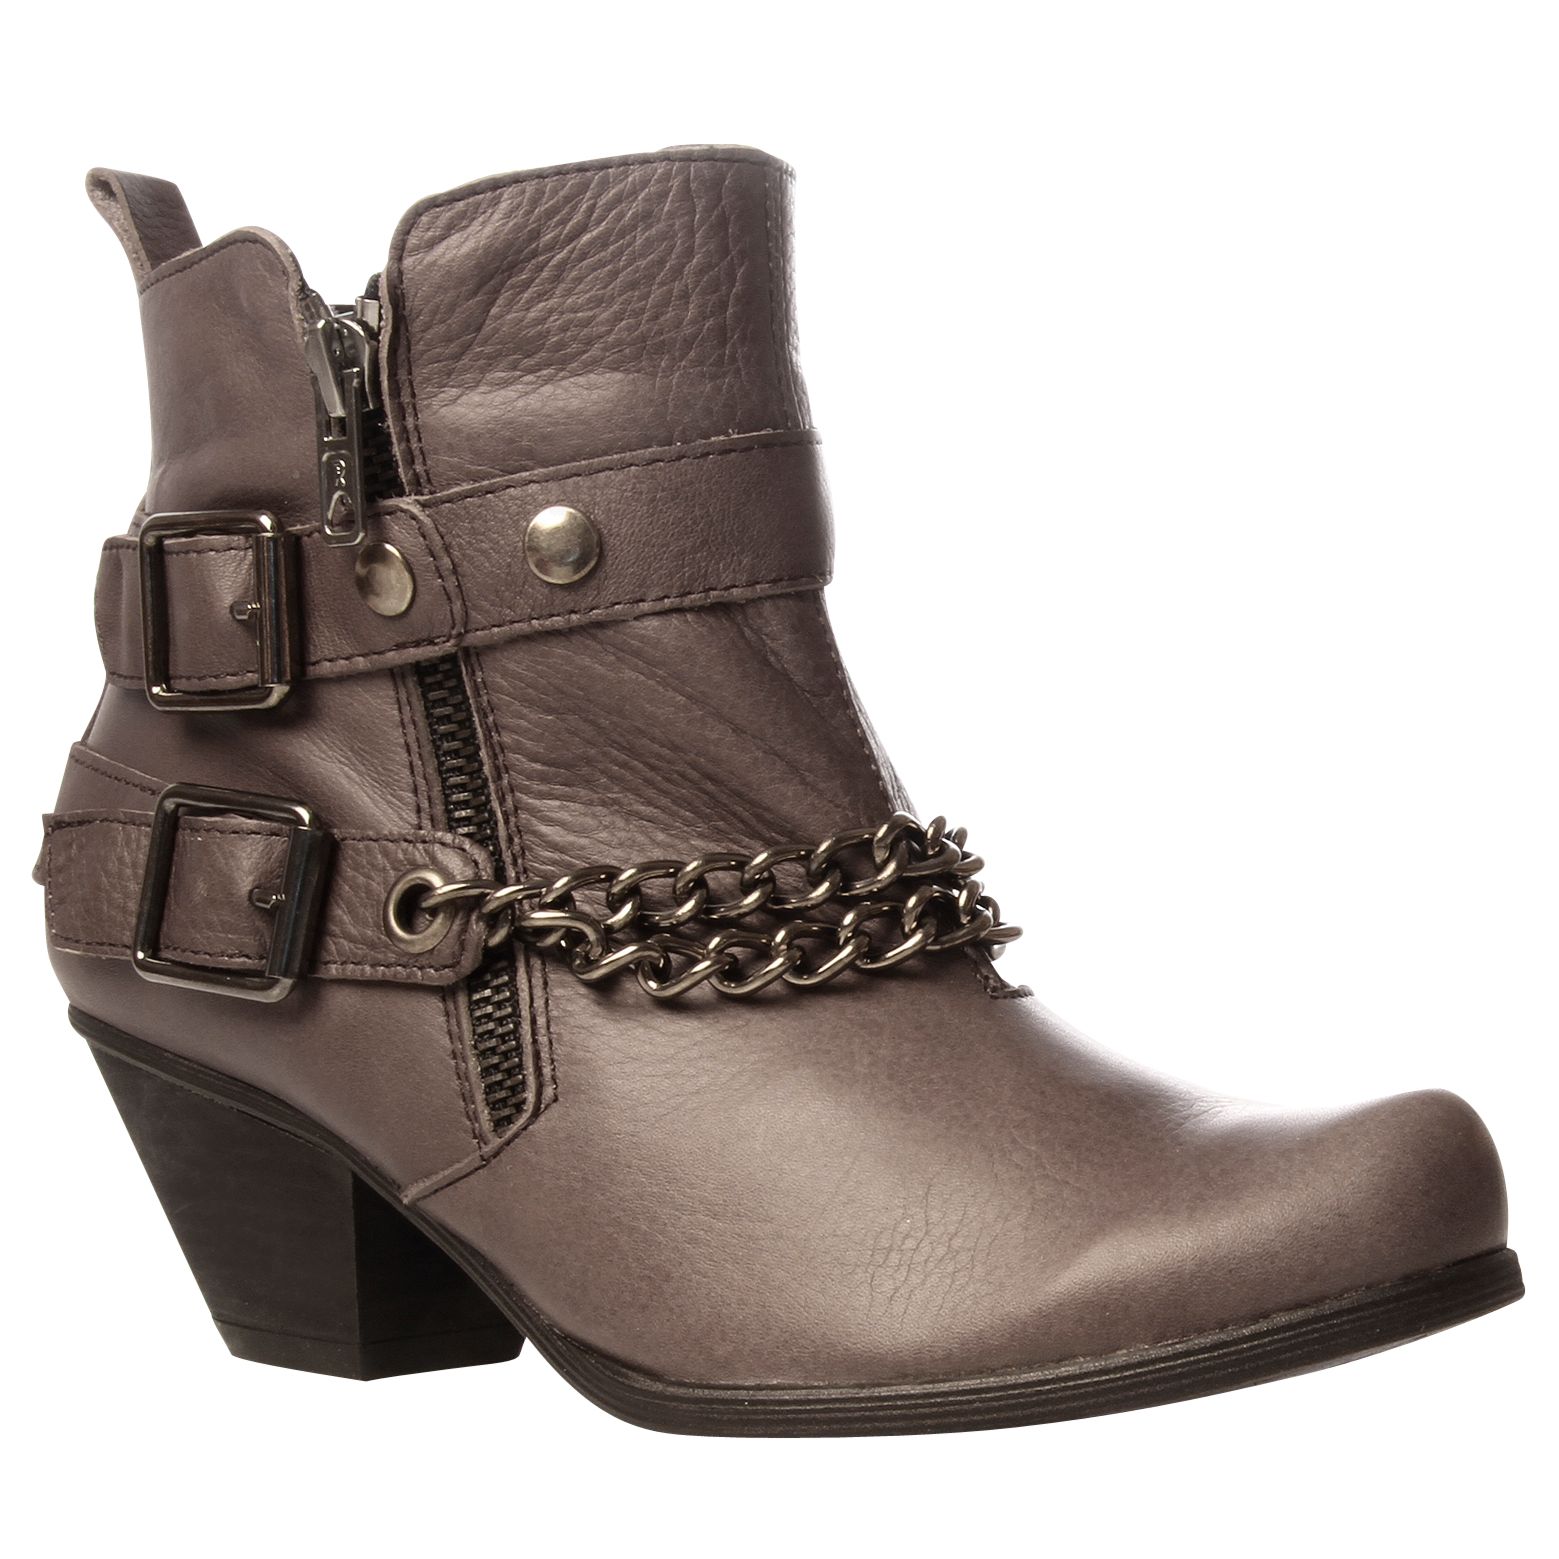 Carvela Swanky Leather Ankle Boots, Grey at John Lewis